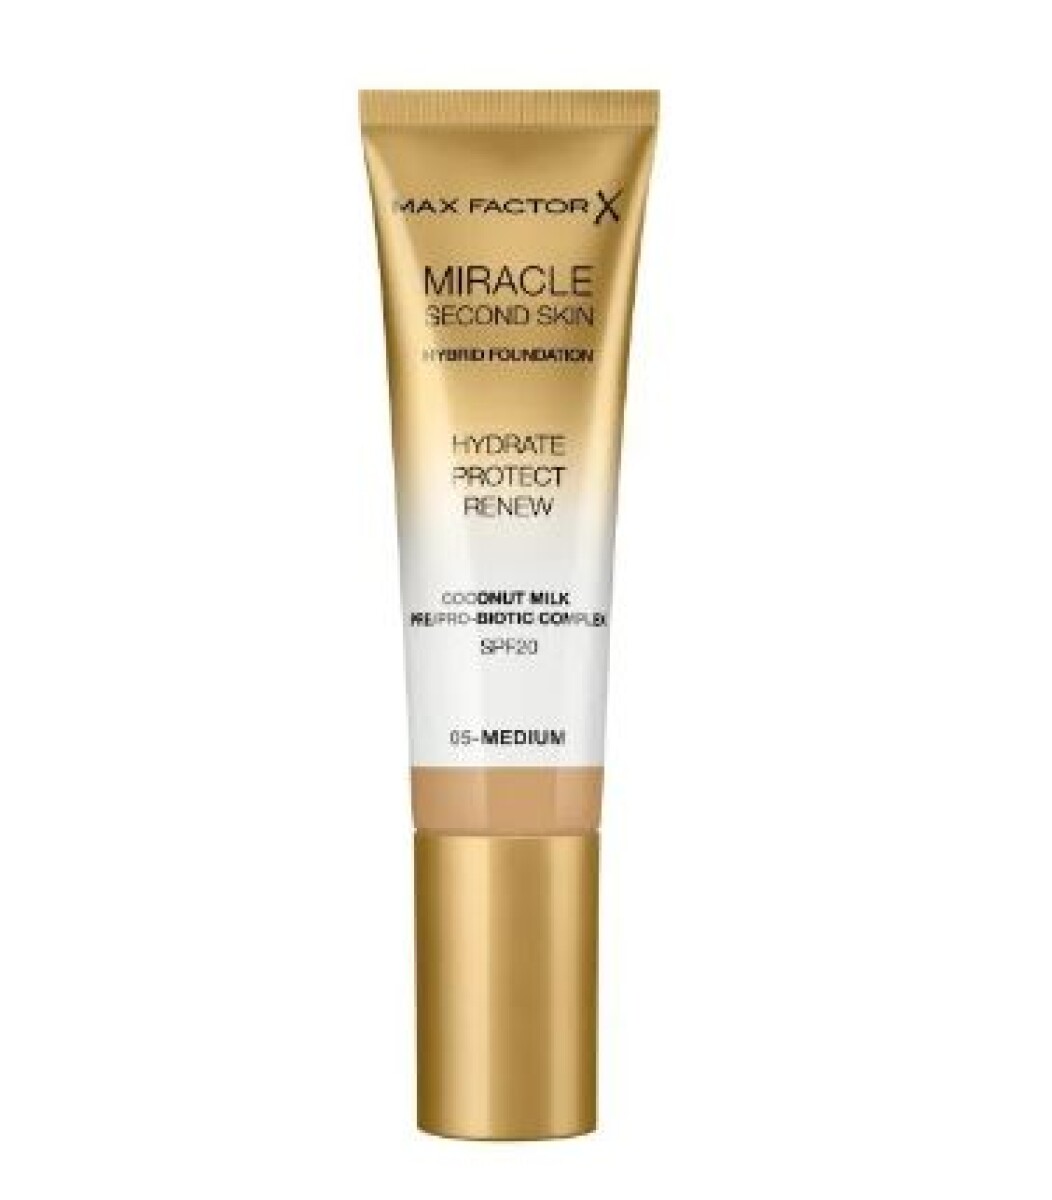 Max Factor Miracle Touch Second Skin 5 Medium 